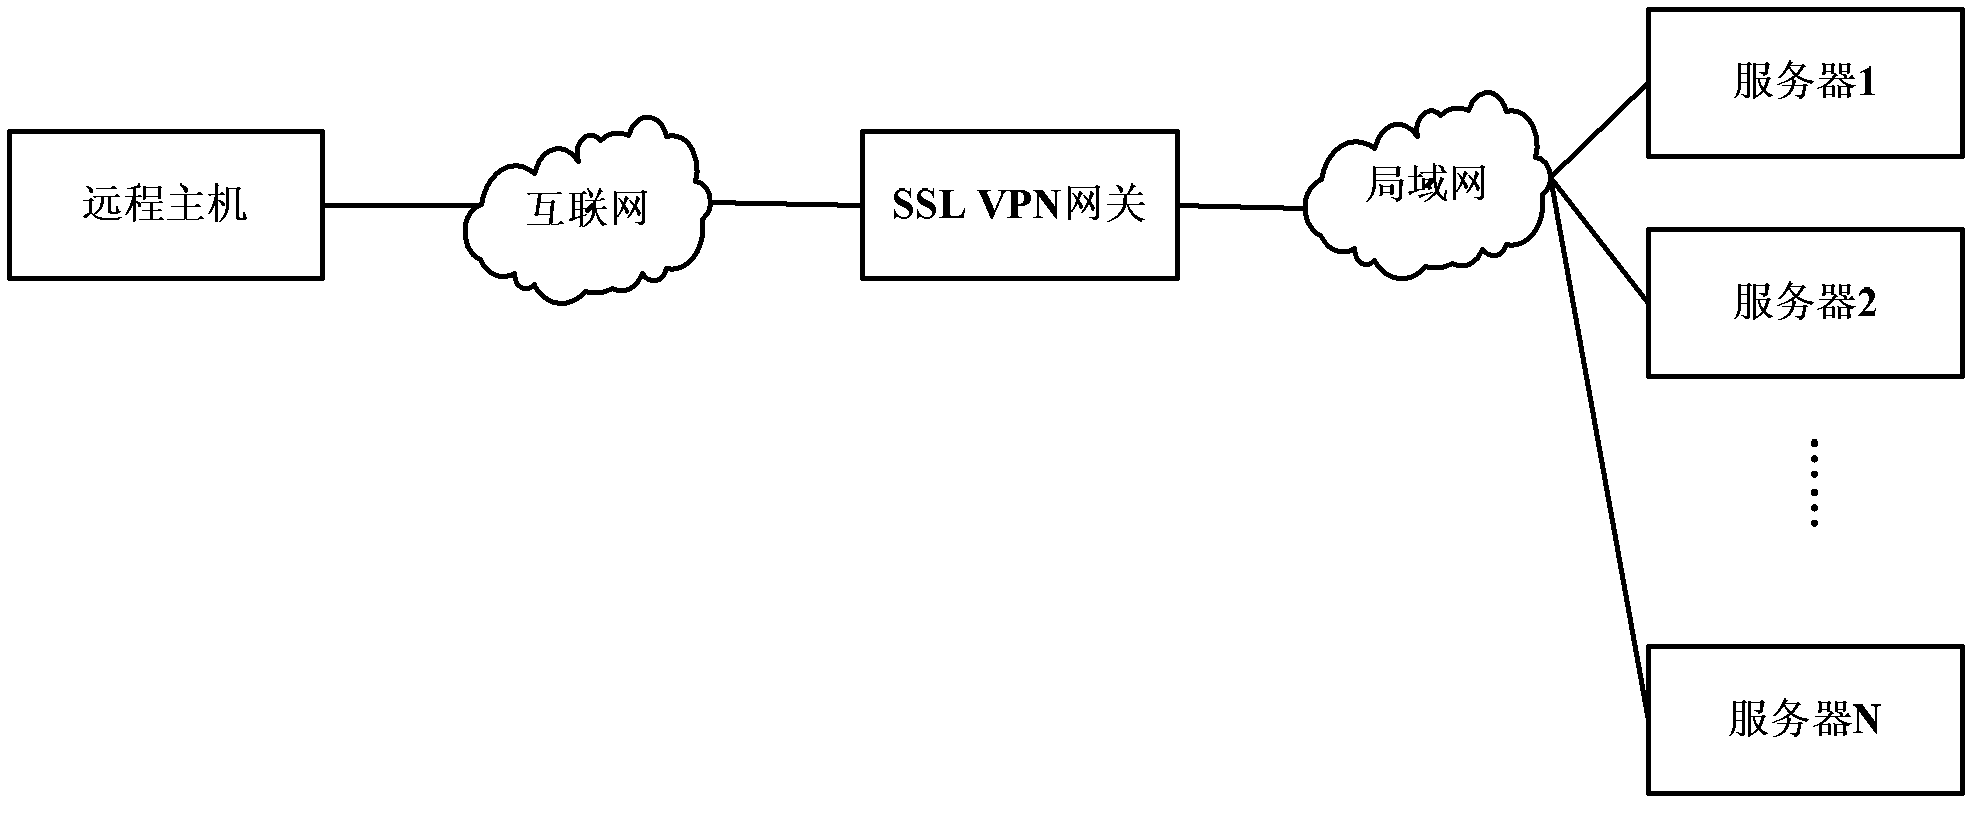 Network resource access control method, device and related equipment